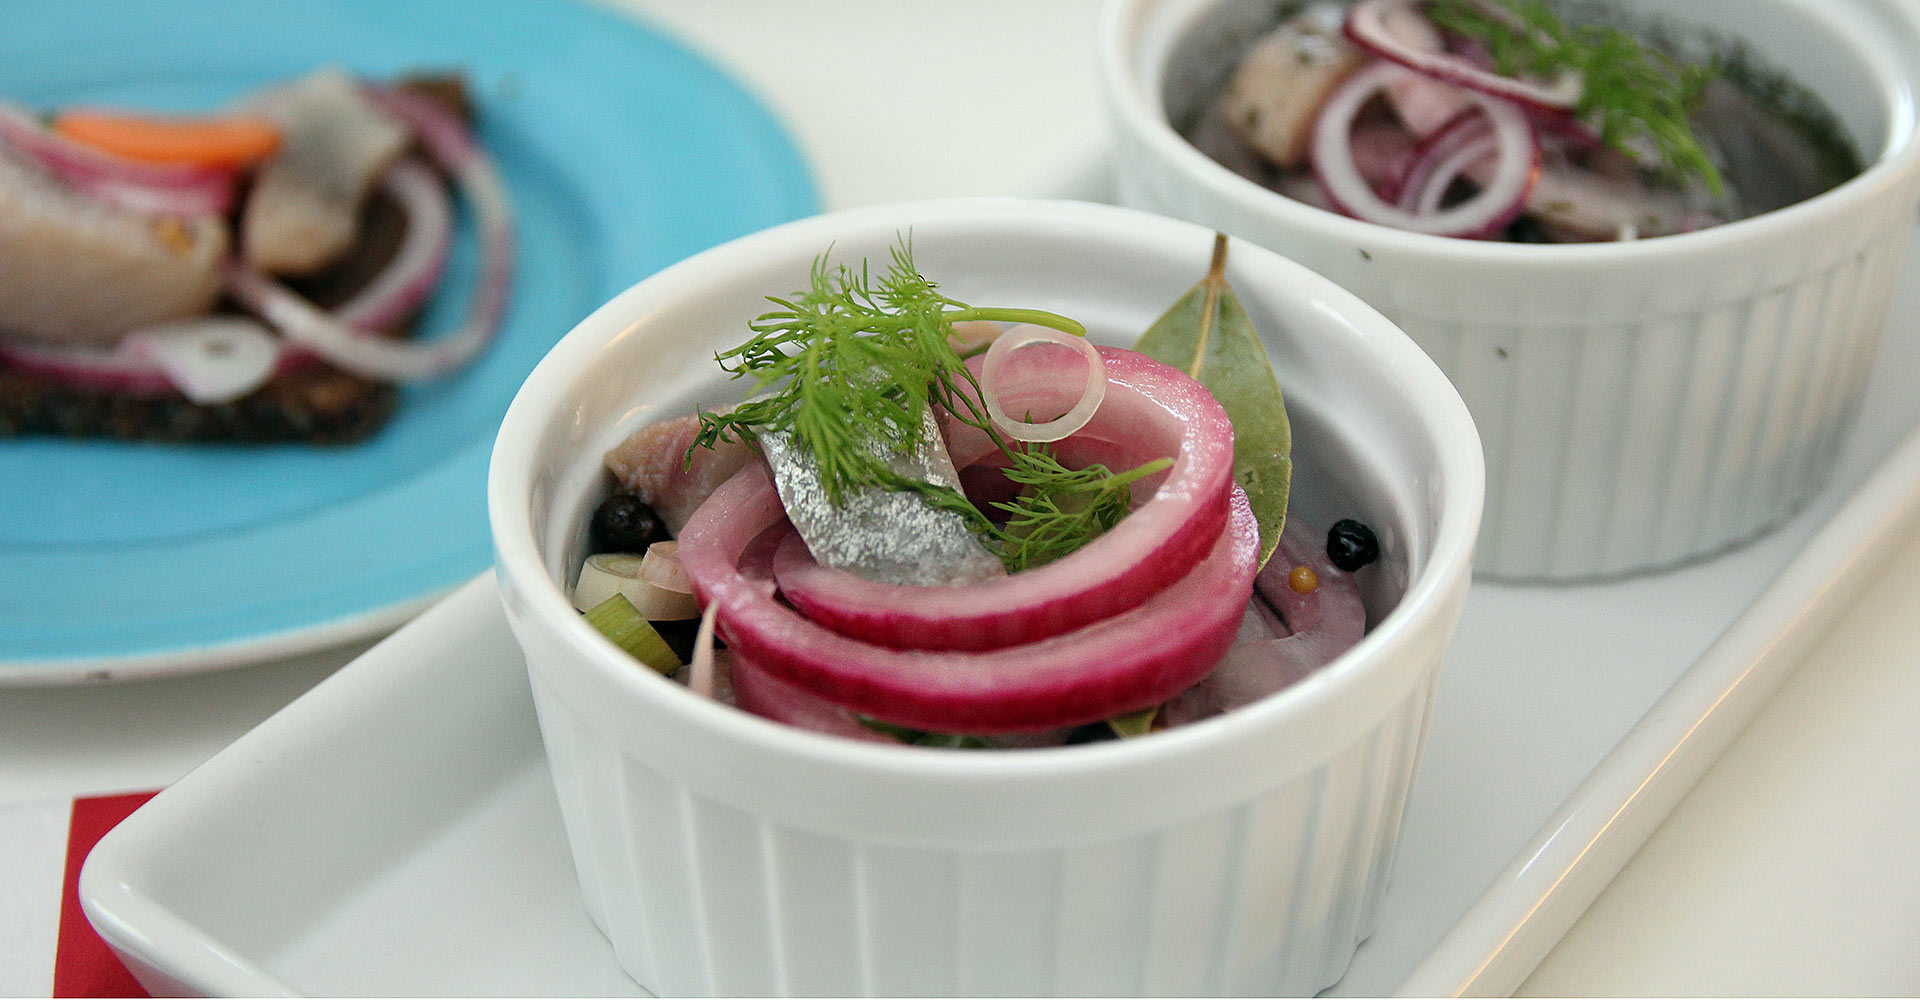 Picture of pickled herring pickled in a glass jar.